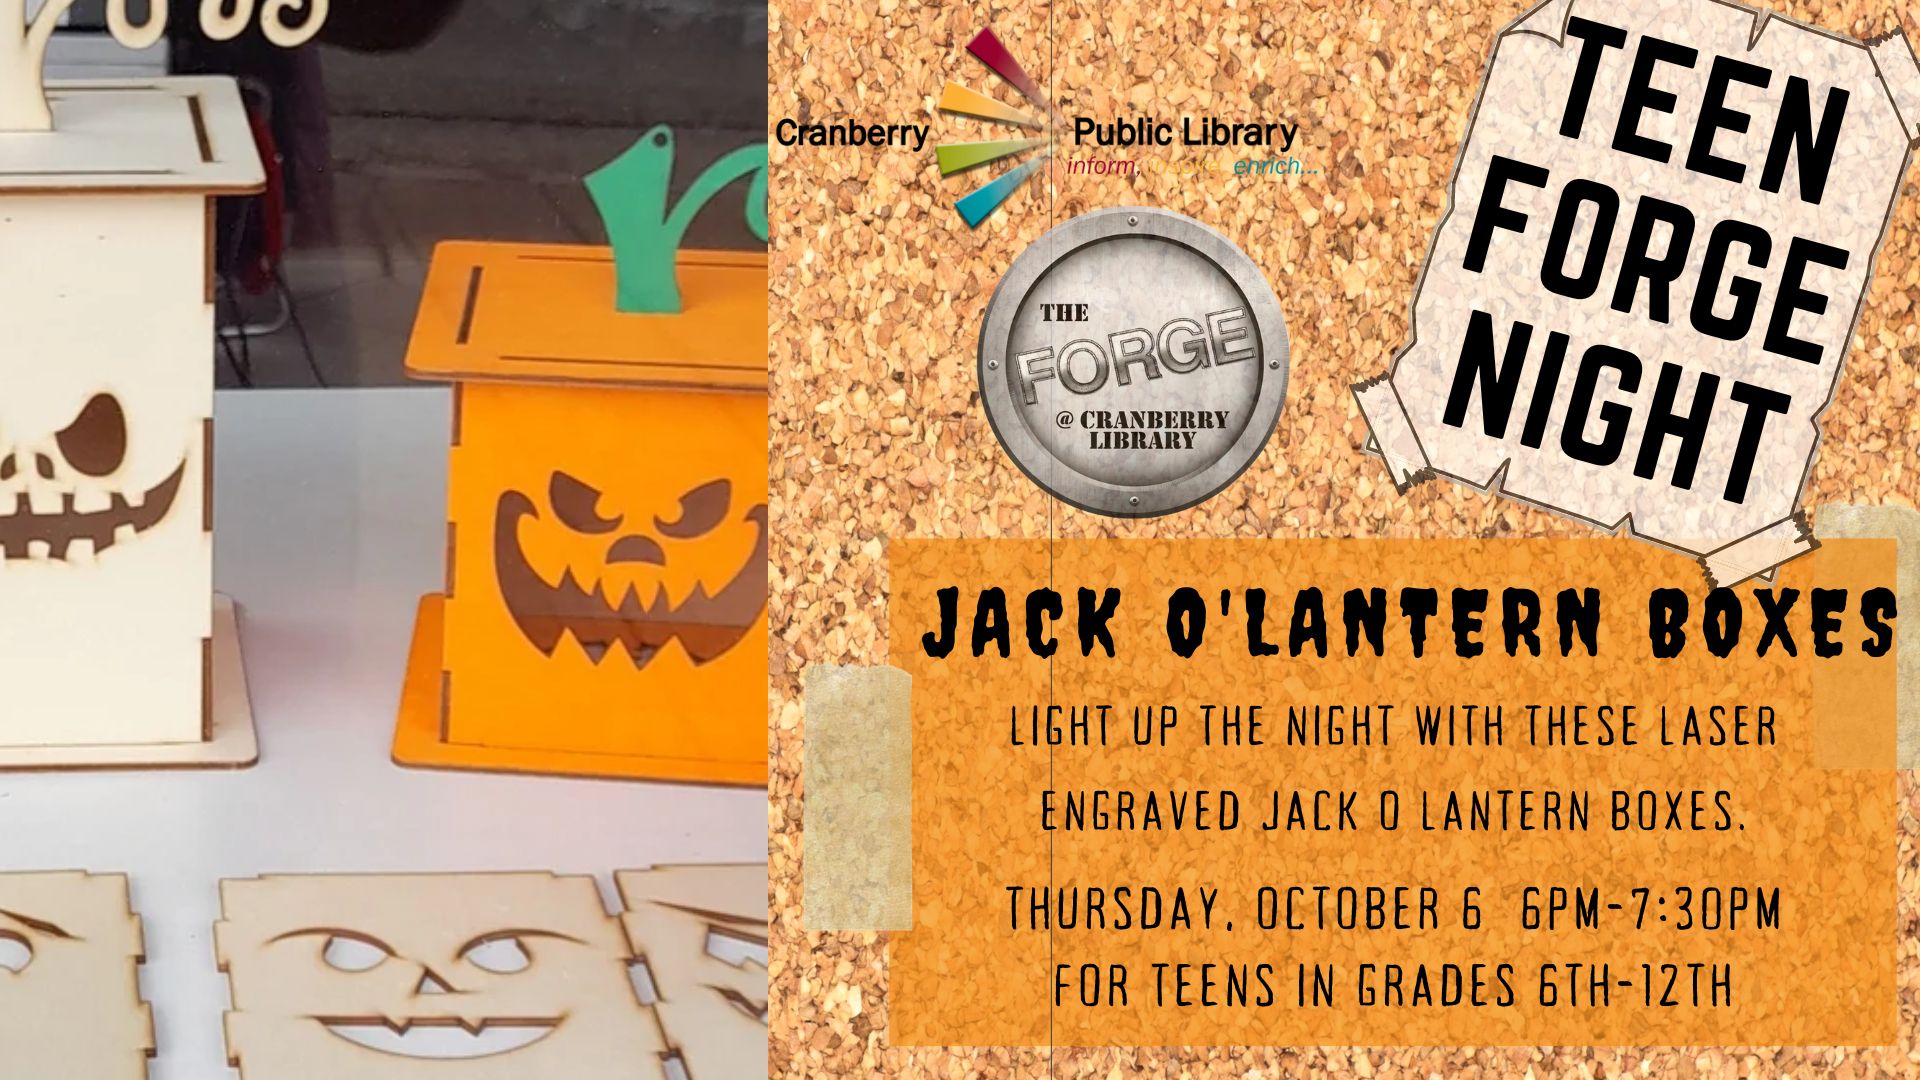 Flyer for Teen Forge Night Jack O' Lantern Boxes